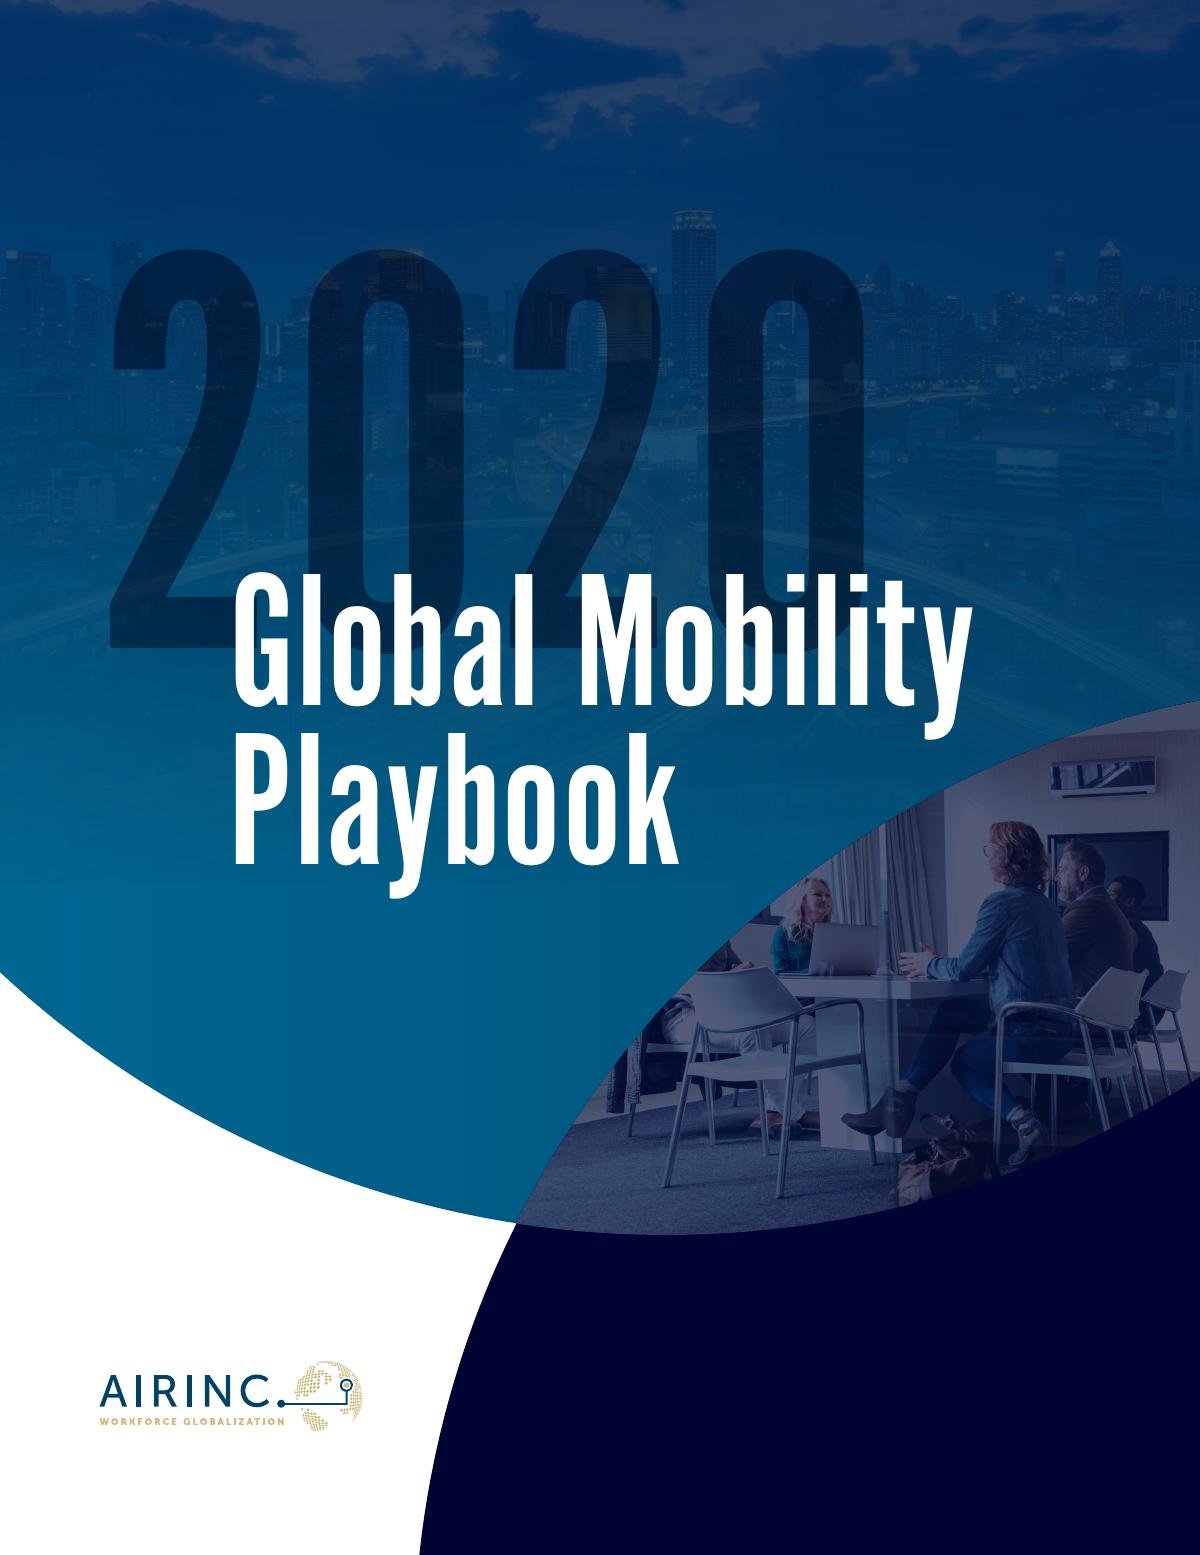 2020 Global Mobility Playbook